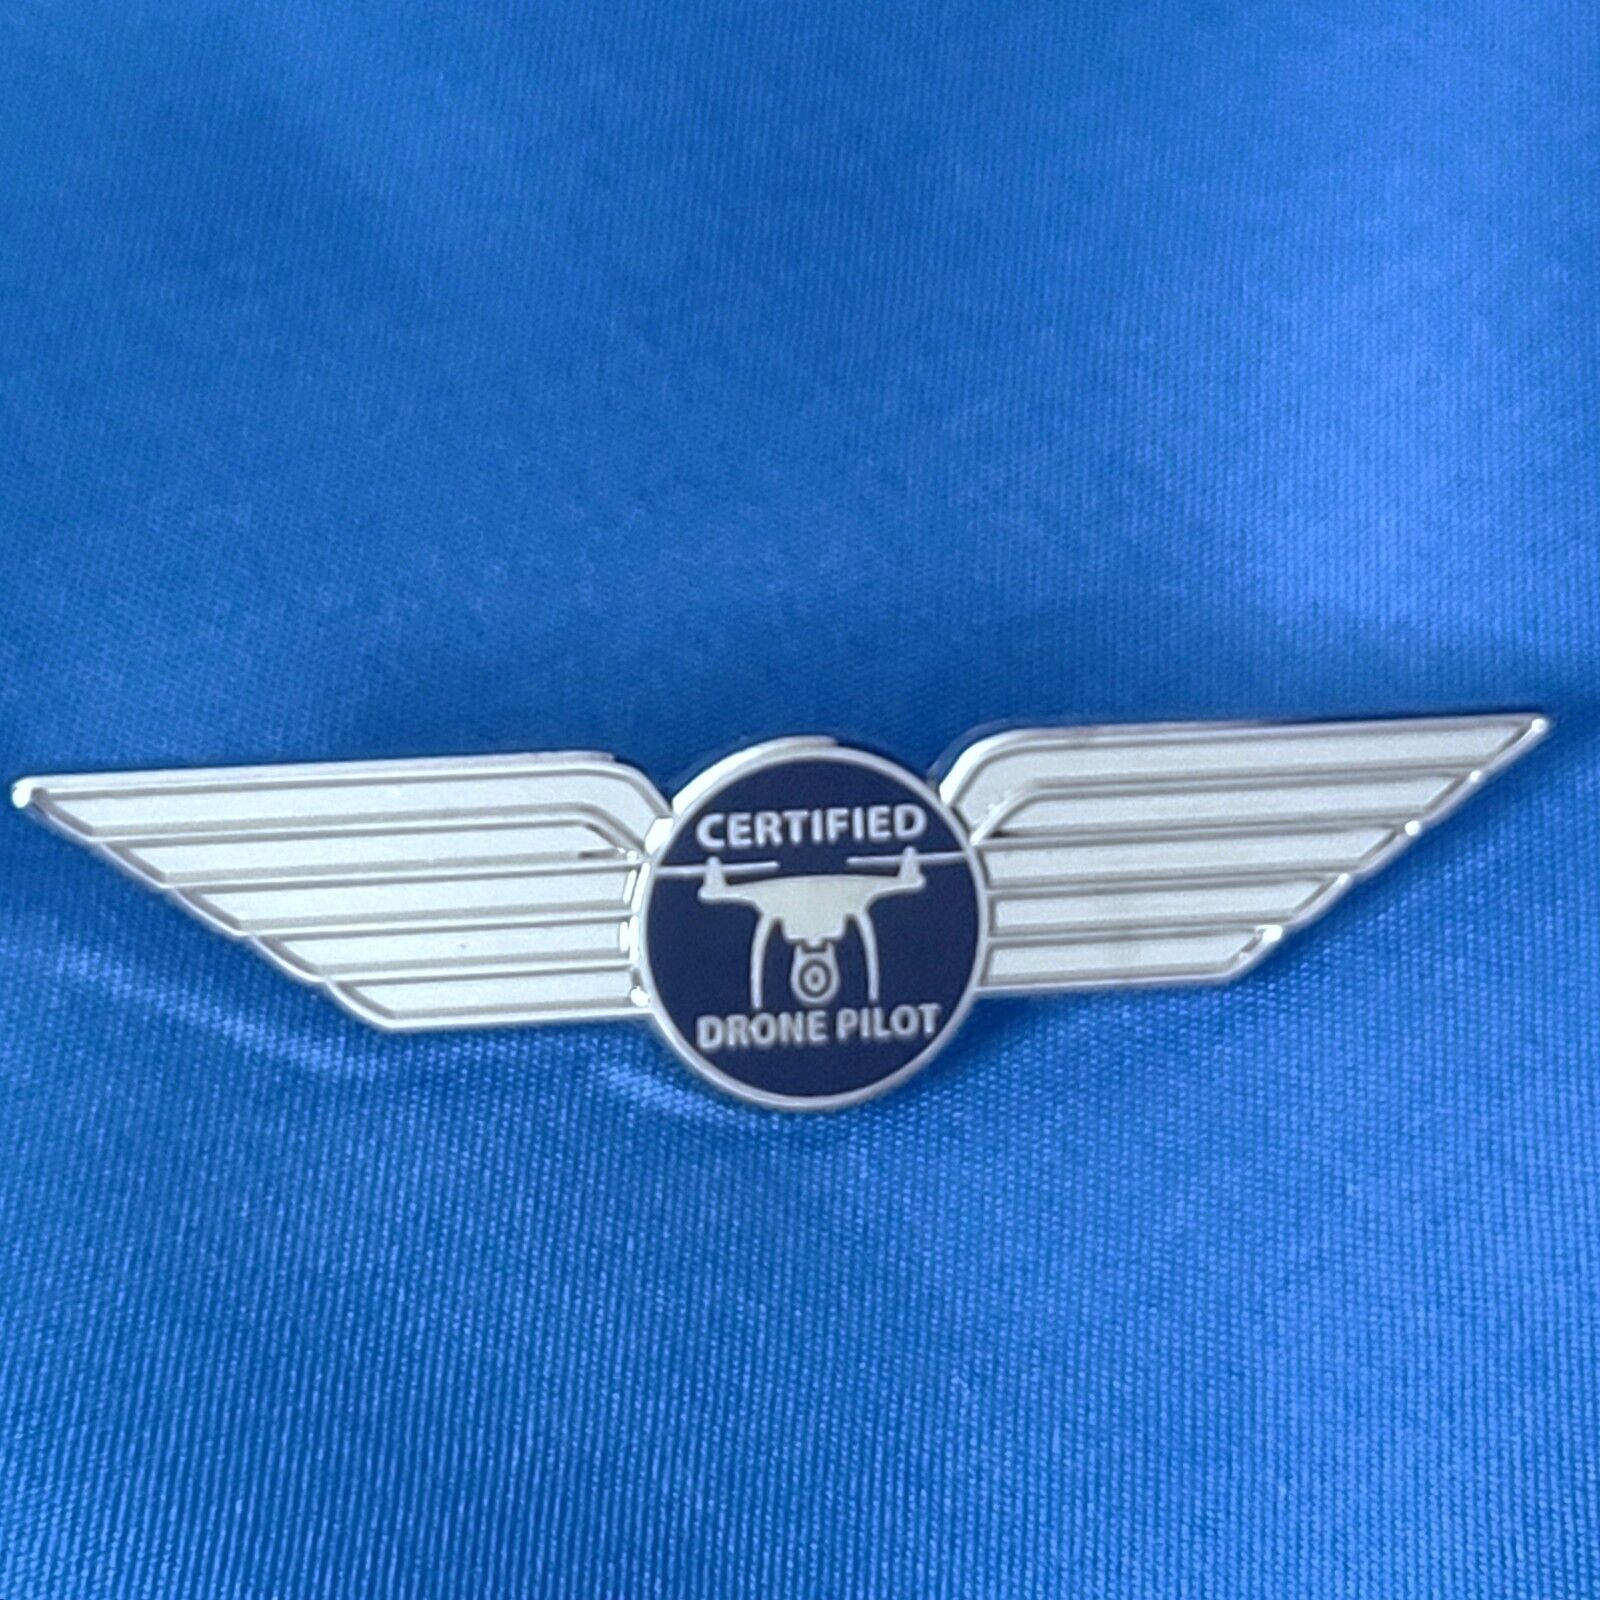 Certified Drone Pilot Wing Pin, Item #1502: Silver color plated finish